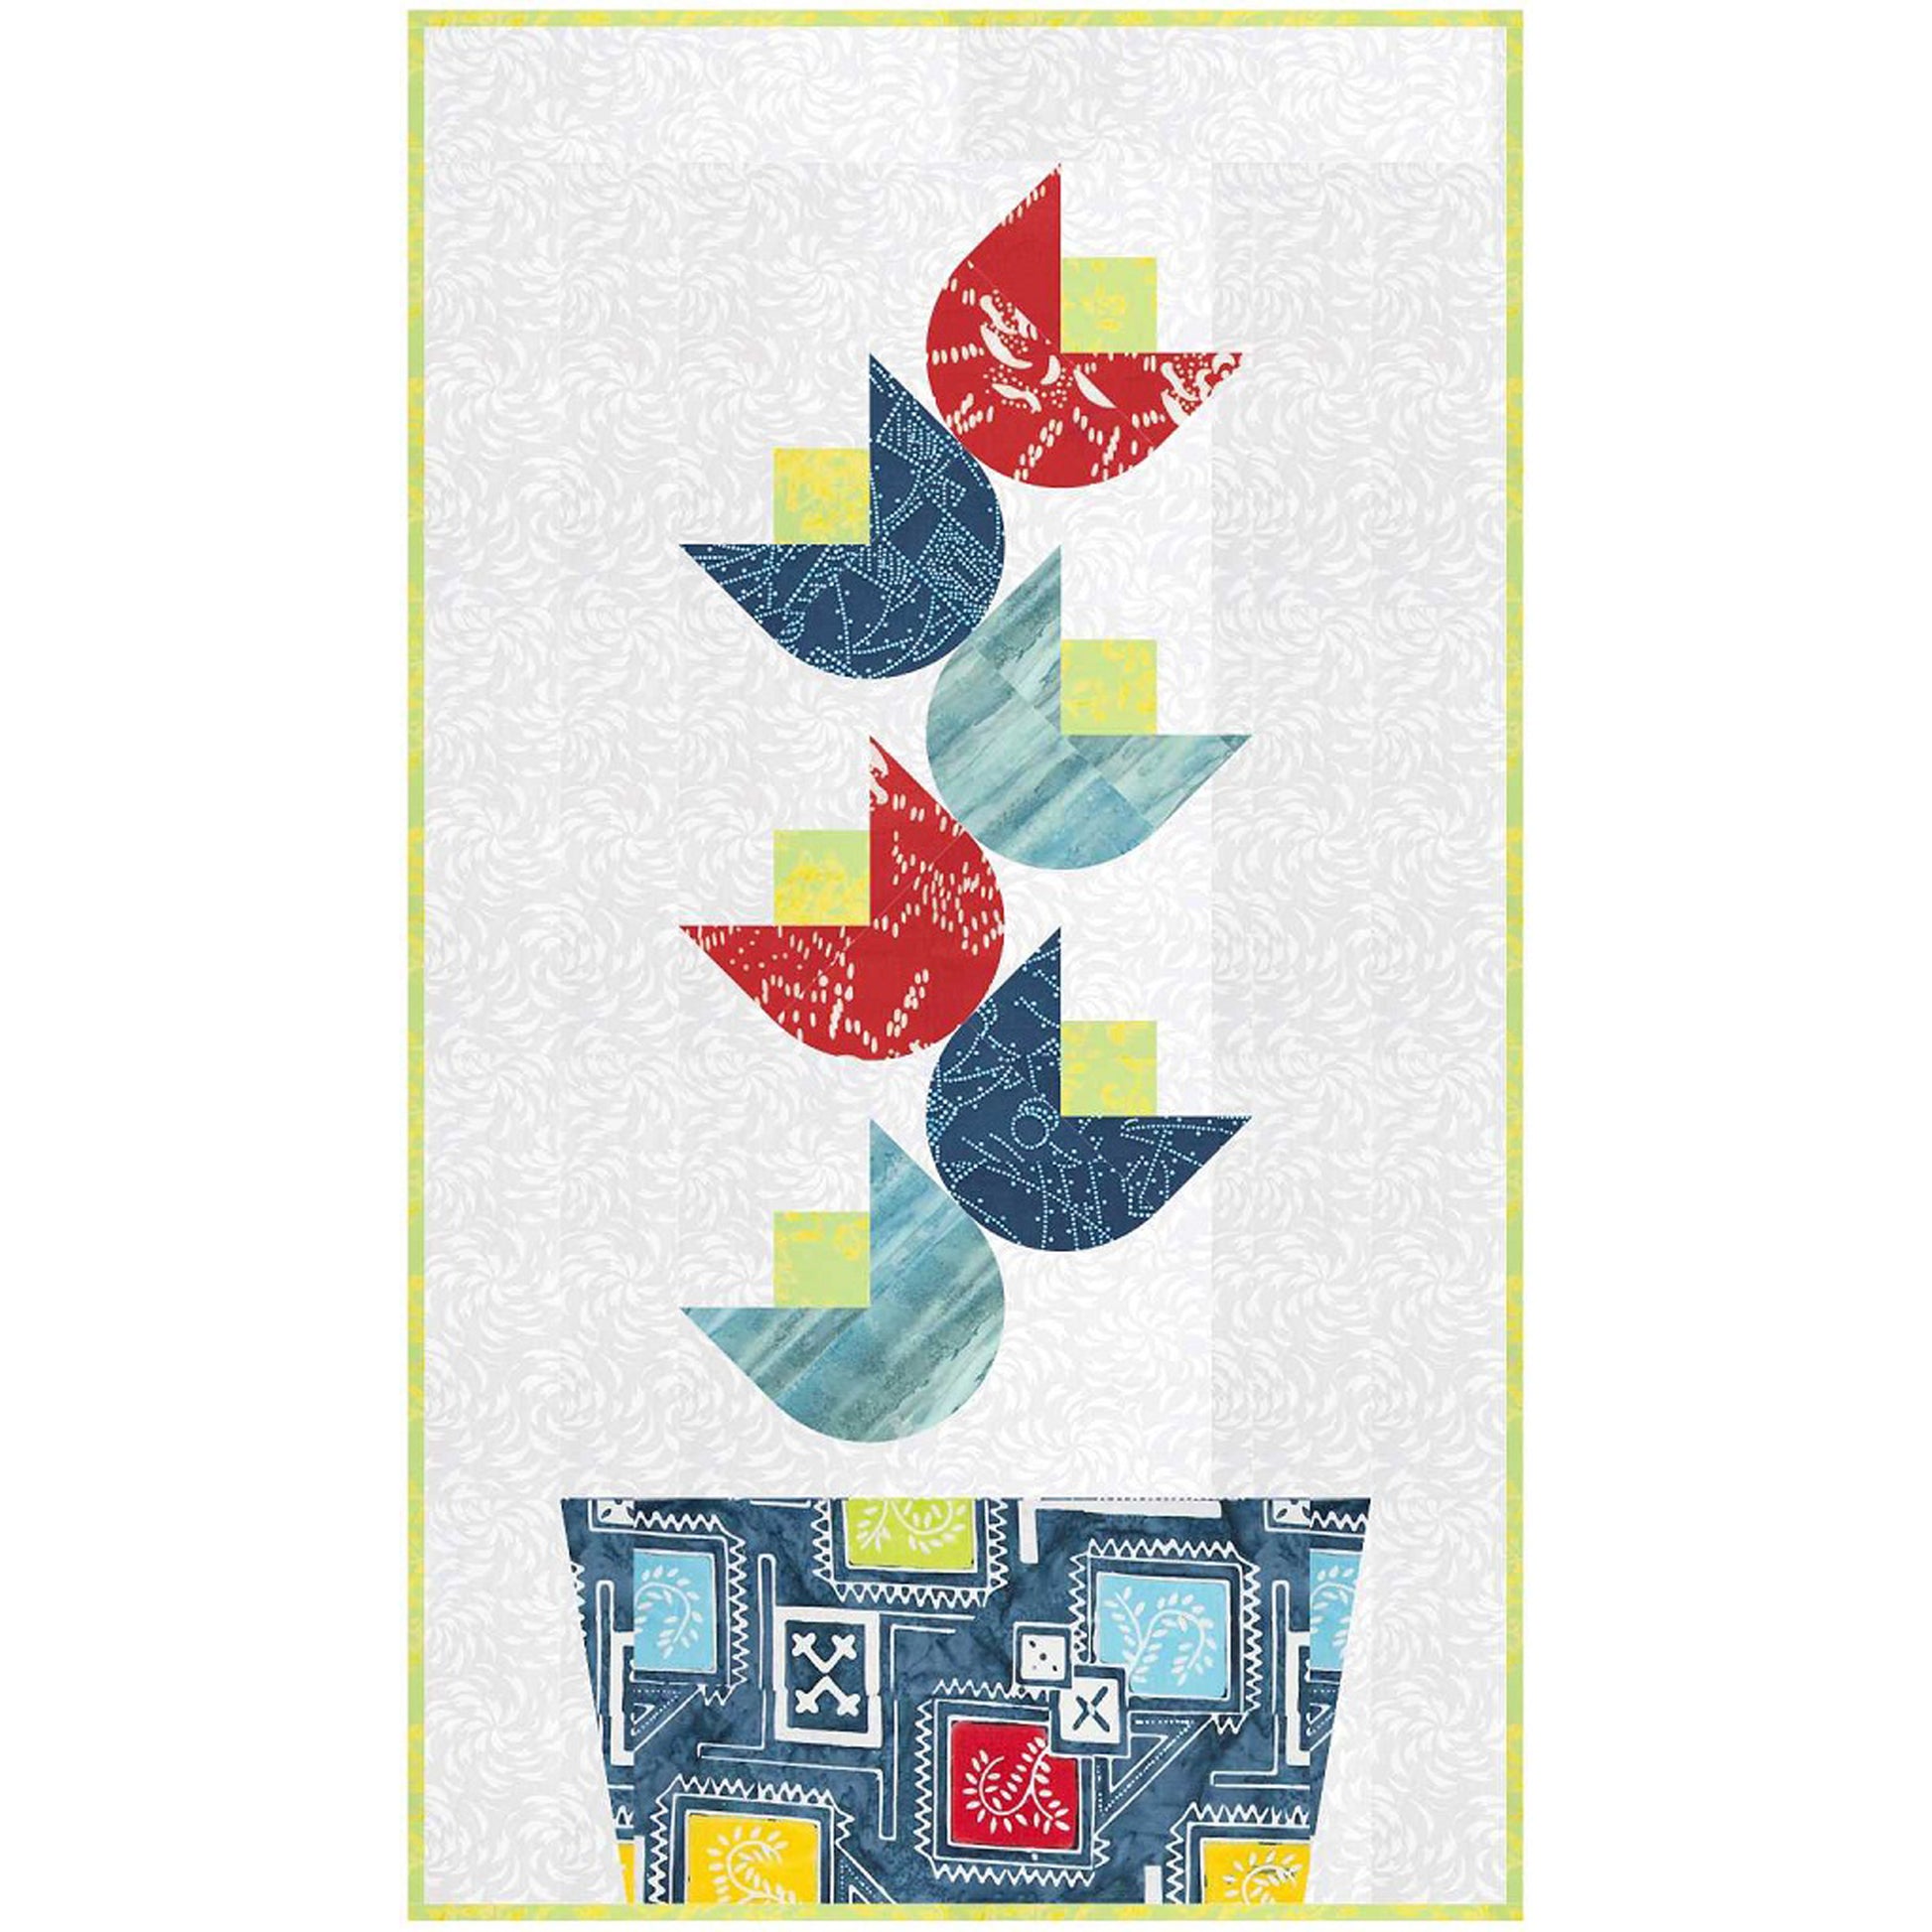 Quilted wall hanging of red and blue flowers in a fun blues with colored patches pot designed fabric and a light gray designed fabric background.